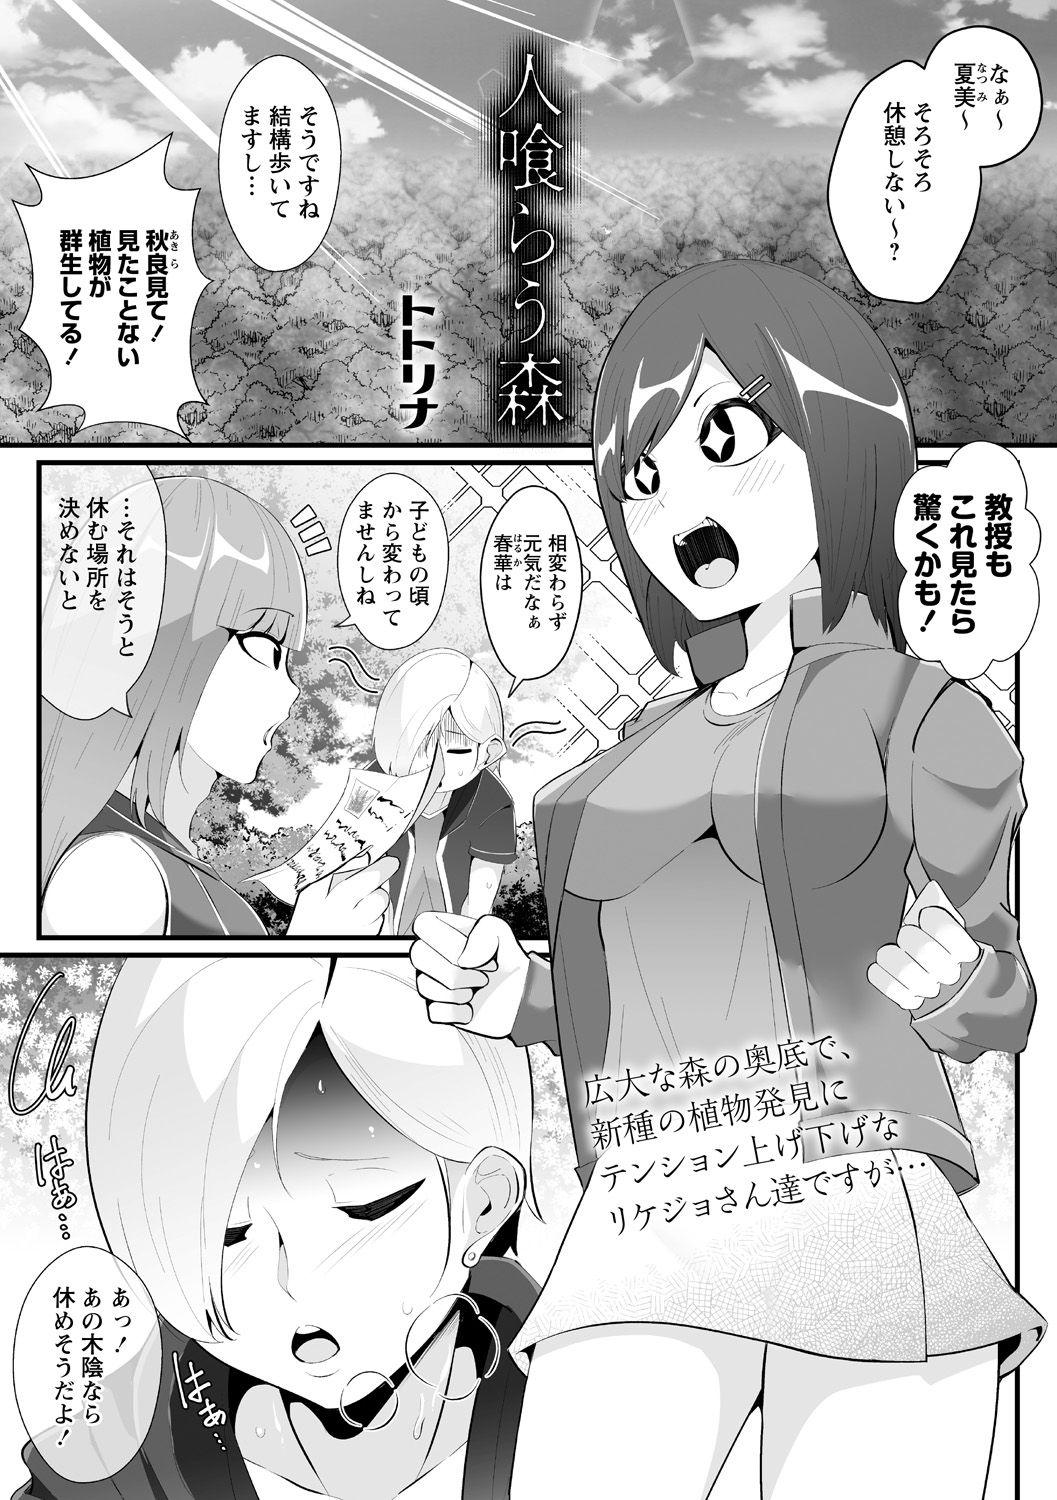 Baile 人喰らう森 Pussy To Mouth - Page 1